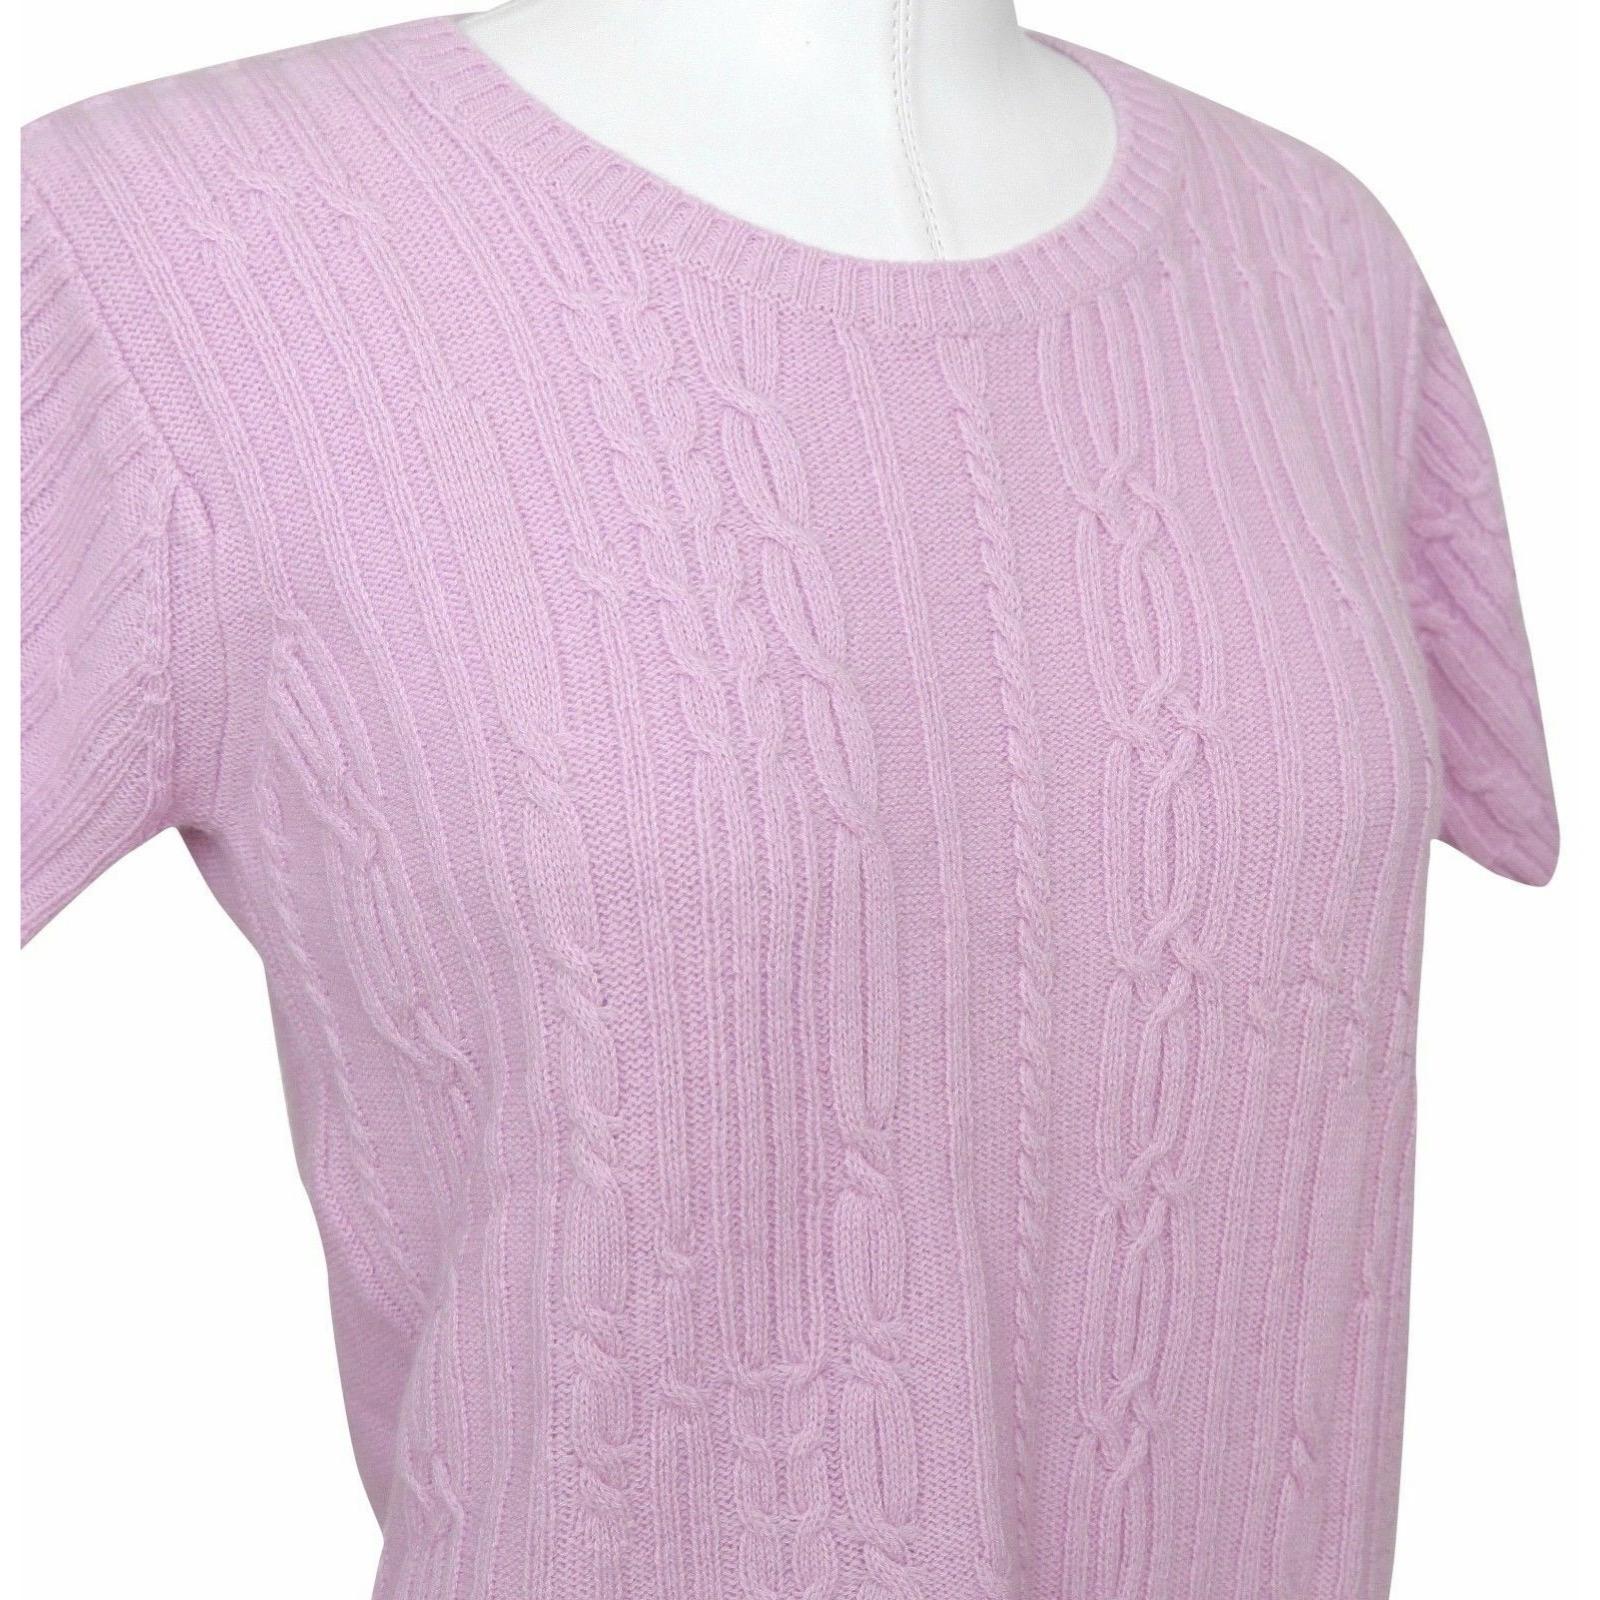 CHLOE Sweater Knit Short Sleeve Top Pink Crew Neck Wool Sz S For Sale 3